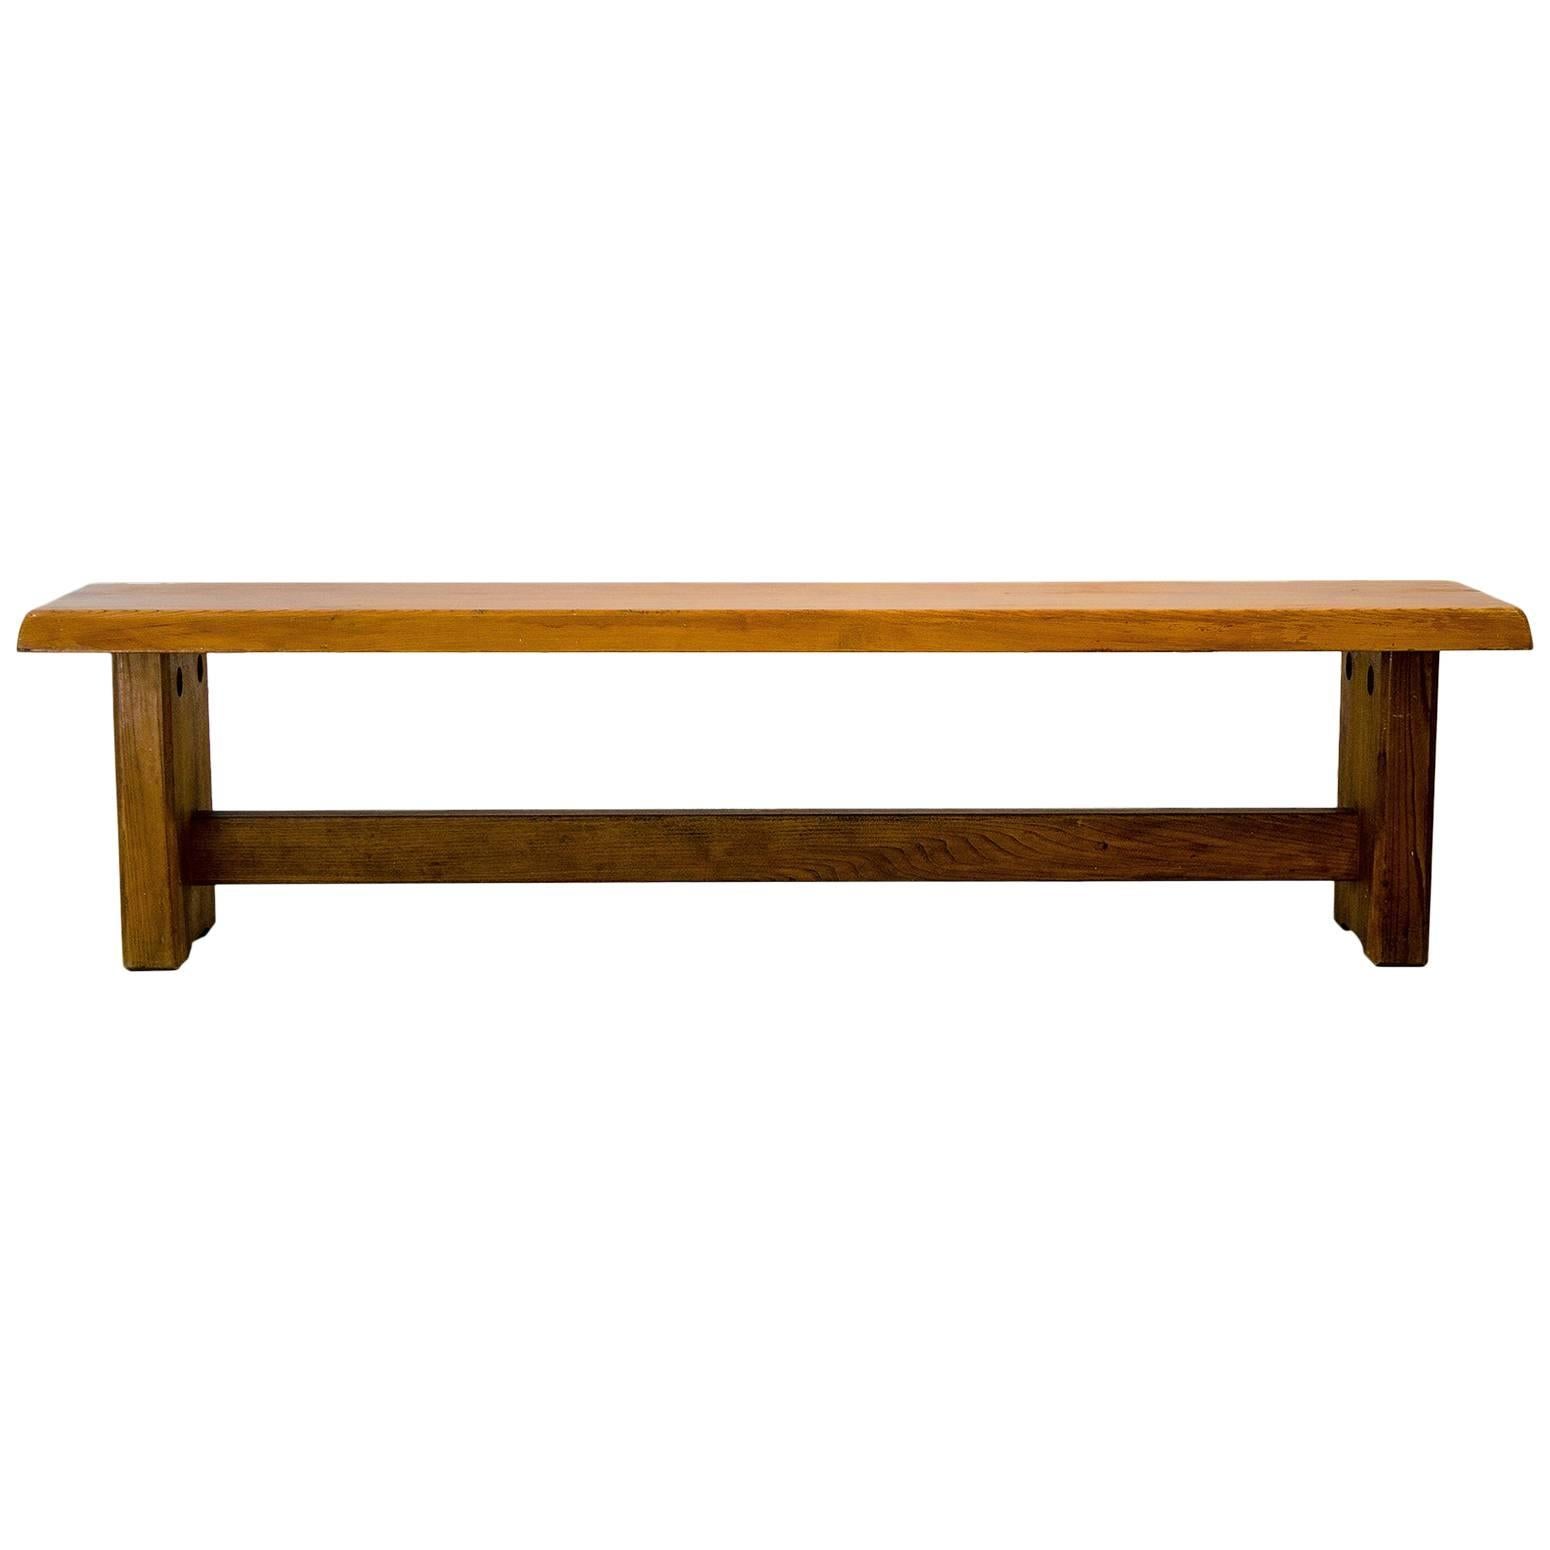 Pierre Chapo Midcentury Solid Elm Wood French Bench, 1960s